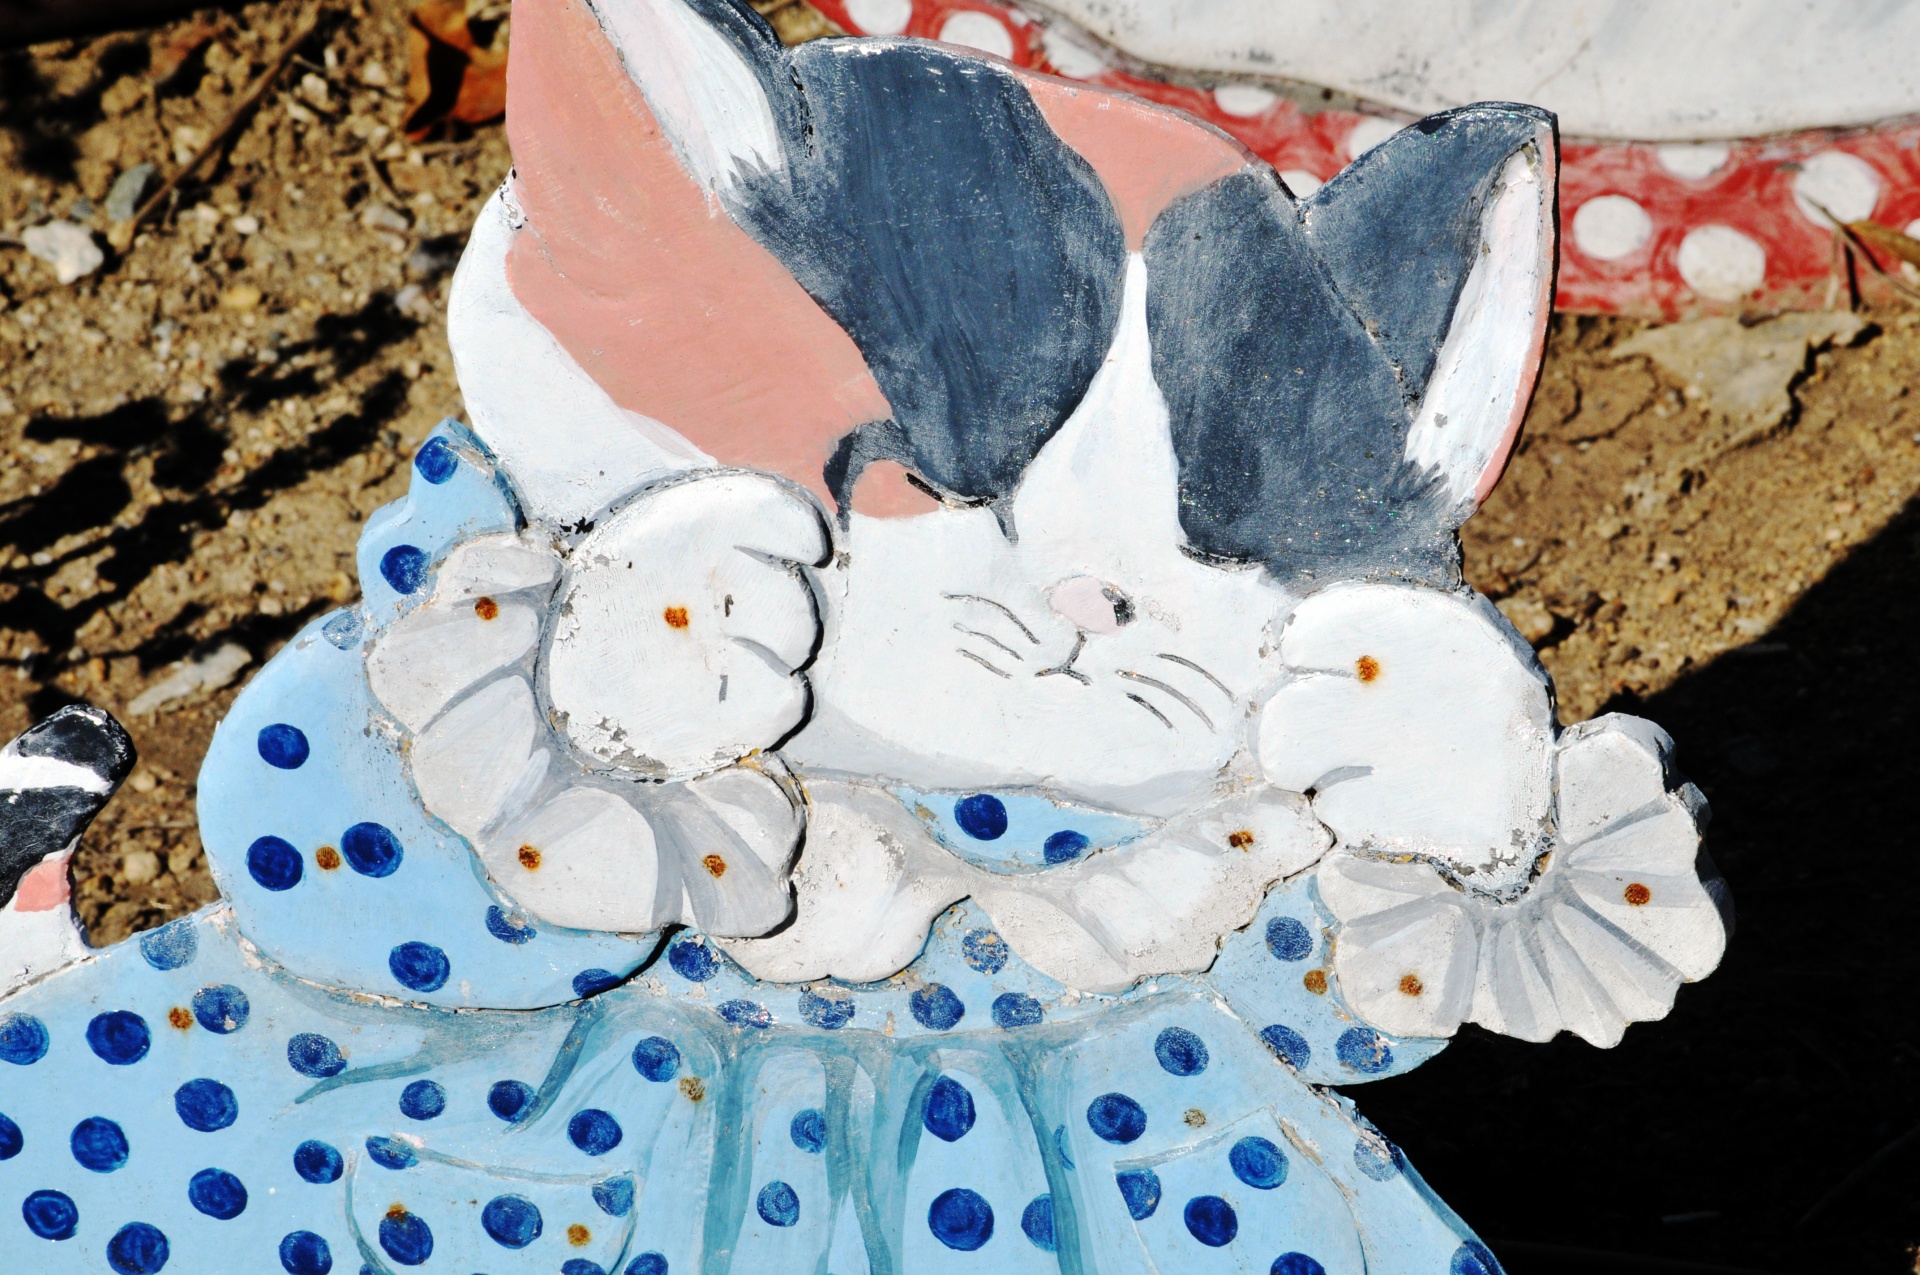 Cute lawn decoration of a calico kitty wearing a blue polka dot dress